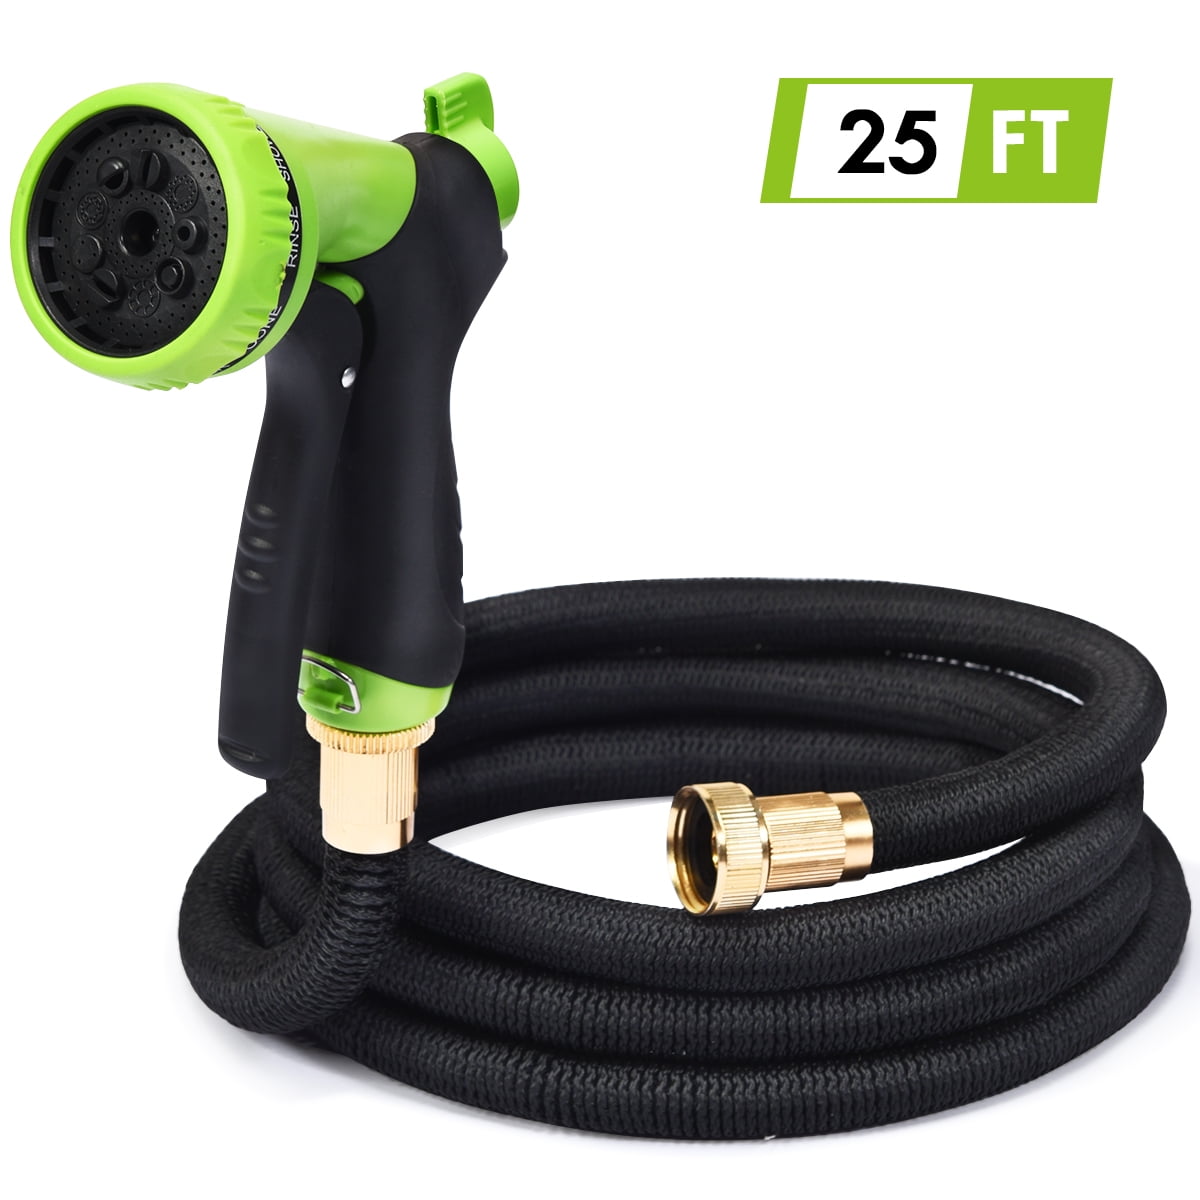 3/4 inch Solid Brass Fittings and Double Latex Core Lightweight & No-Kink Flexible Garden Hose Flexi Hose with 8 Function Nozzle Expandable Garden Hose 100 ft Green